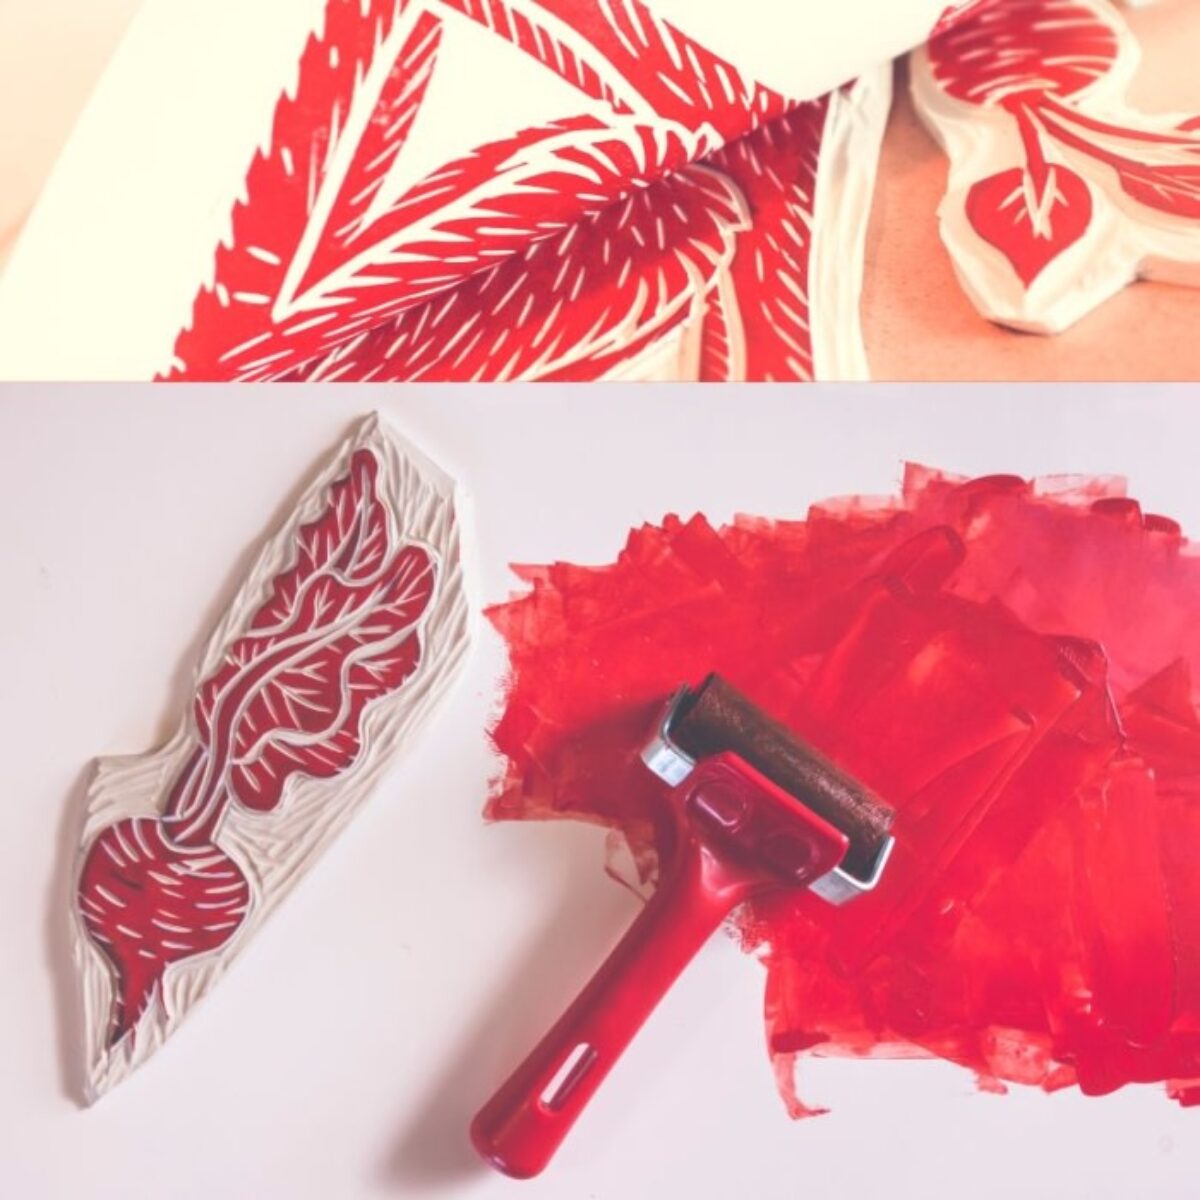 Three Color Reduction Blockprinting: Make Your Own Valentine